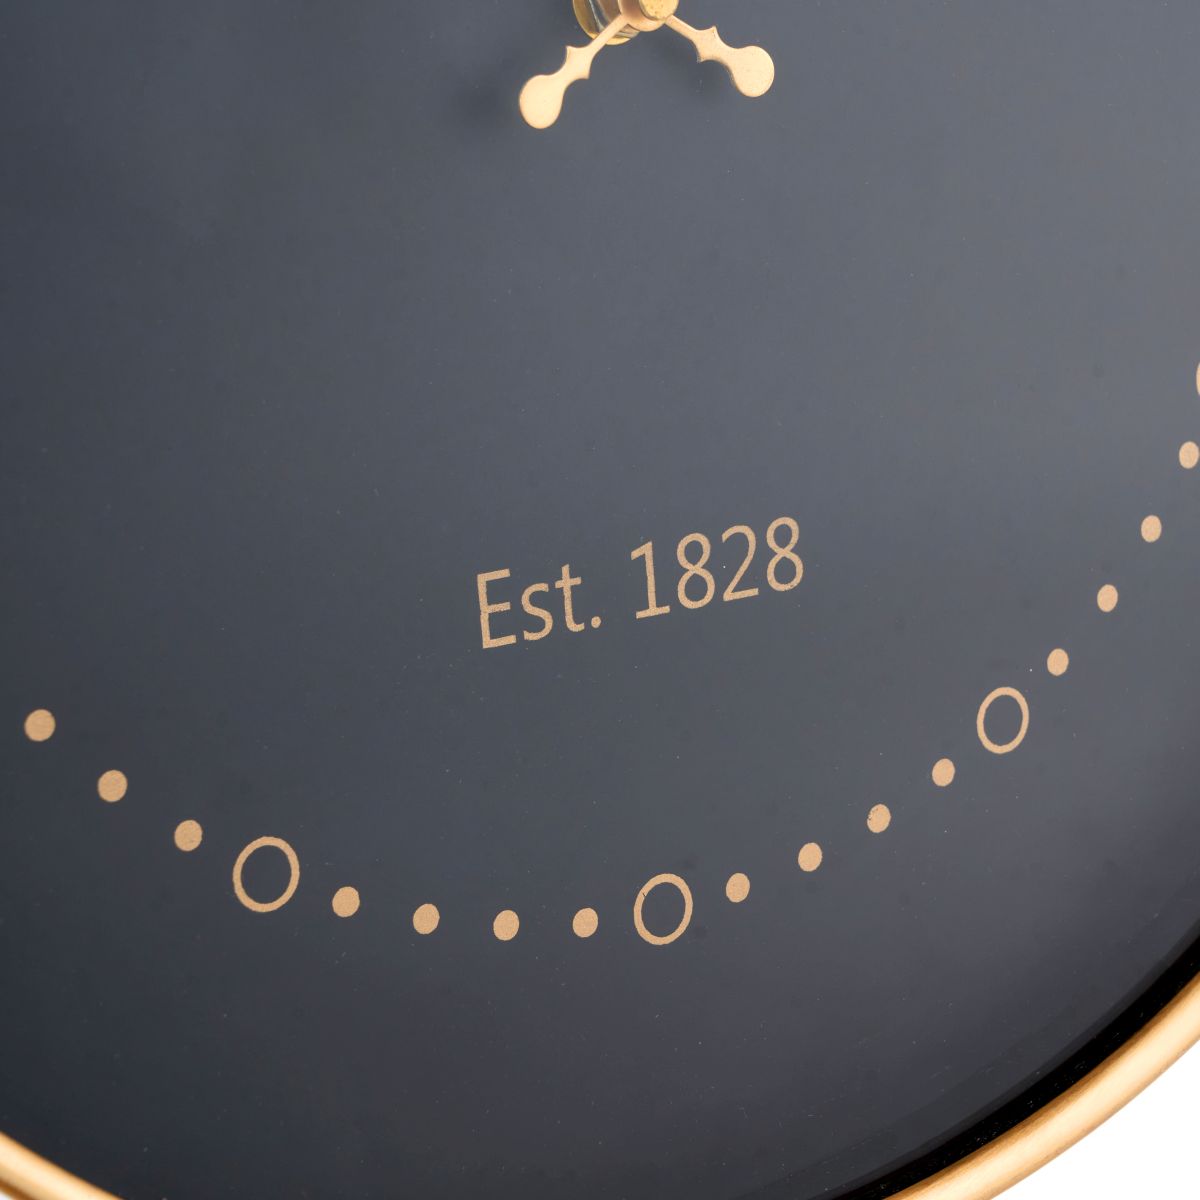 Black Wall Clock with Antique Brass Frame